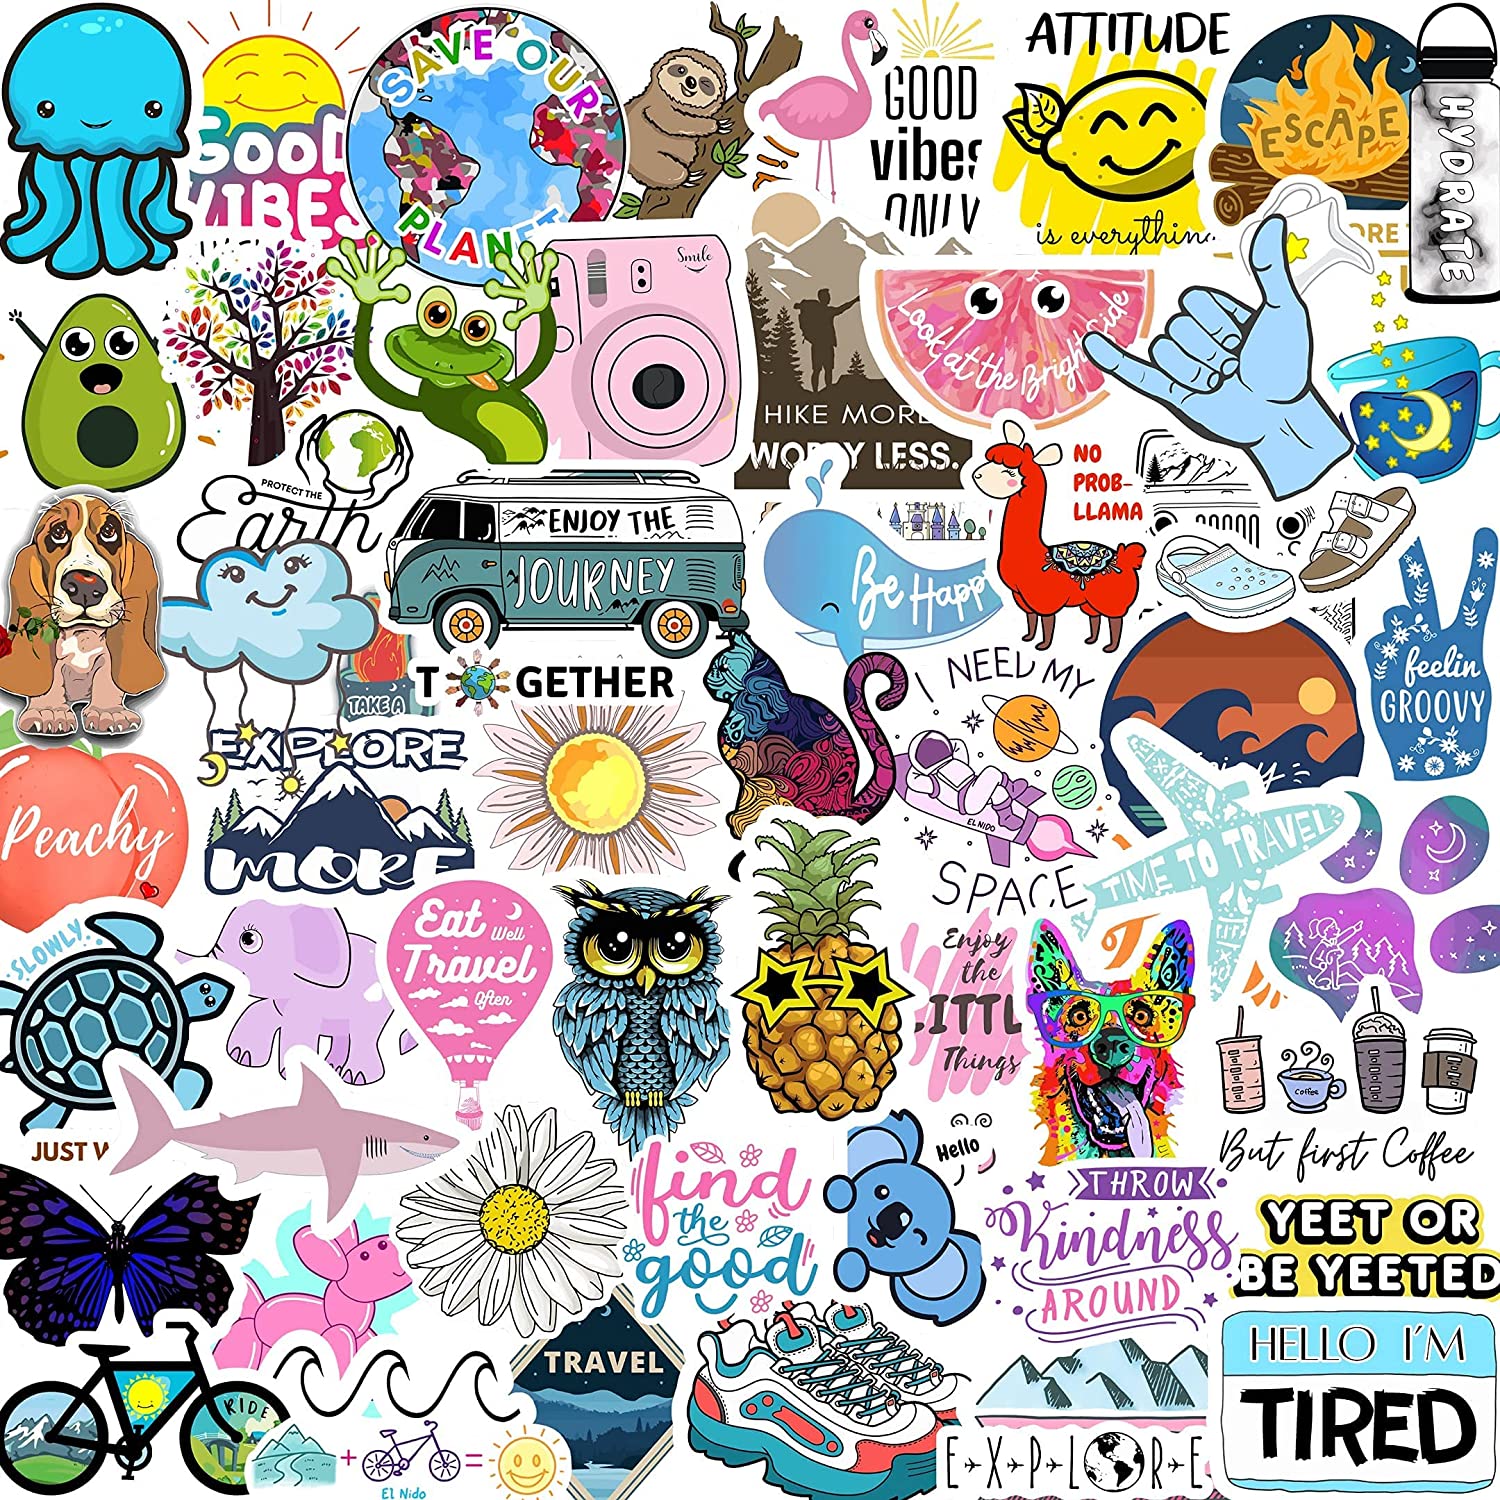 70 210 Stickers For Water Bottles, Sticker Packs, Cute Aesthetic VSCO Vinyl Stickers, Phone Laptop Computer Skateboard Stickers, Water Bottle Stickers, Waterproof Stickers For Teens Kids Girls, Toys & Games